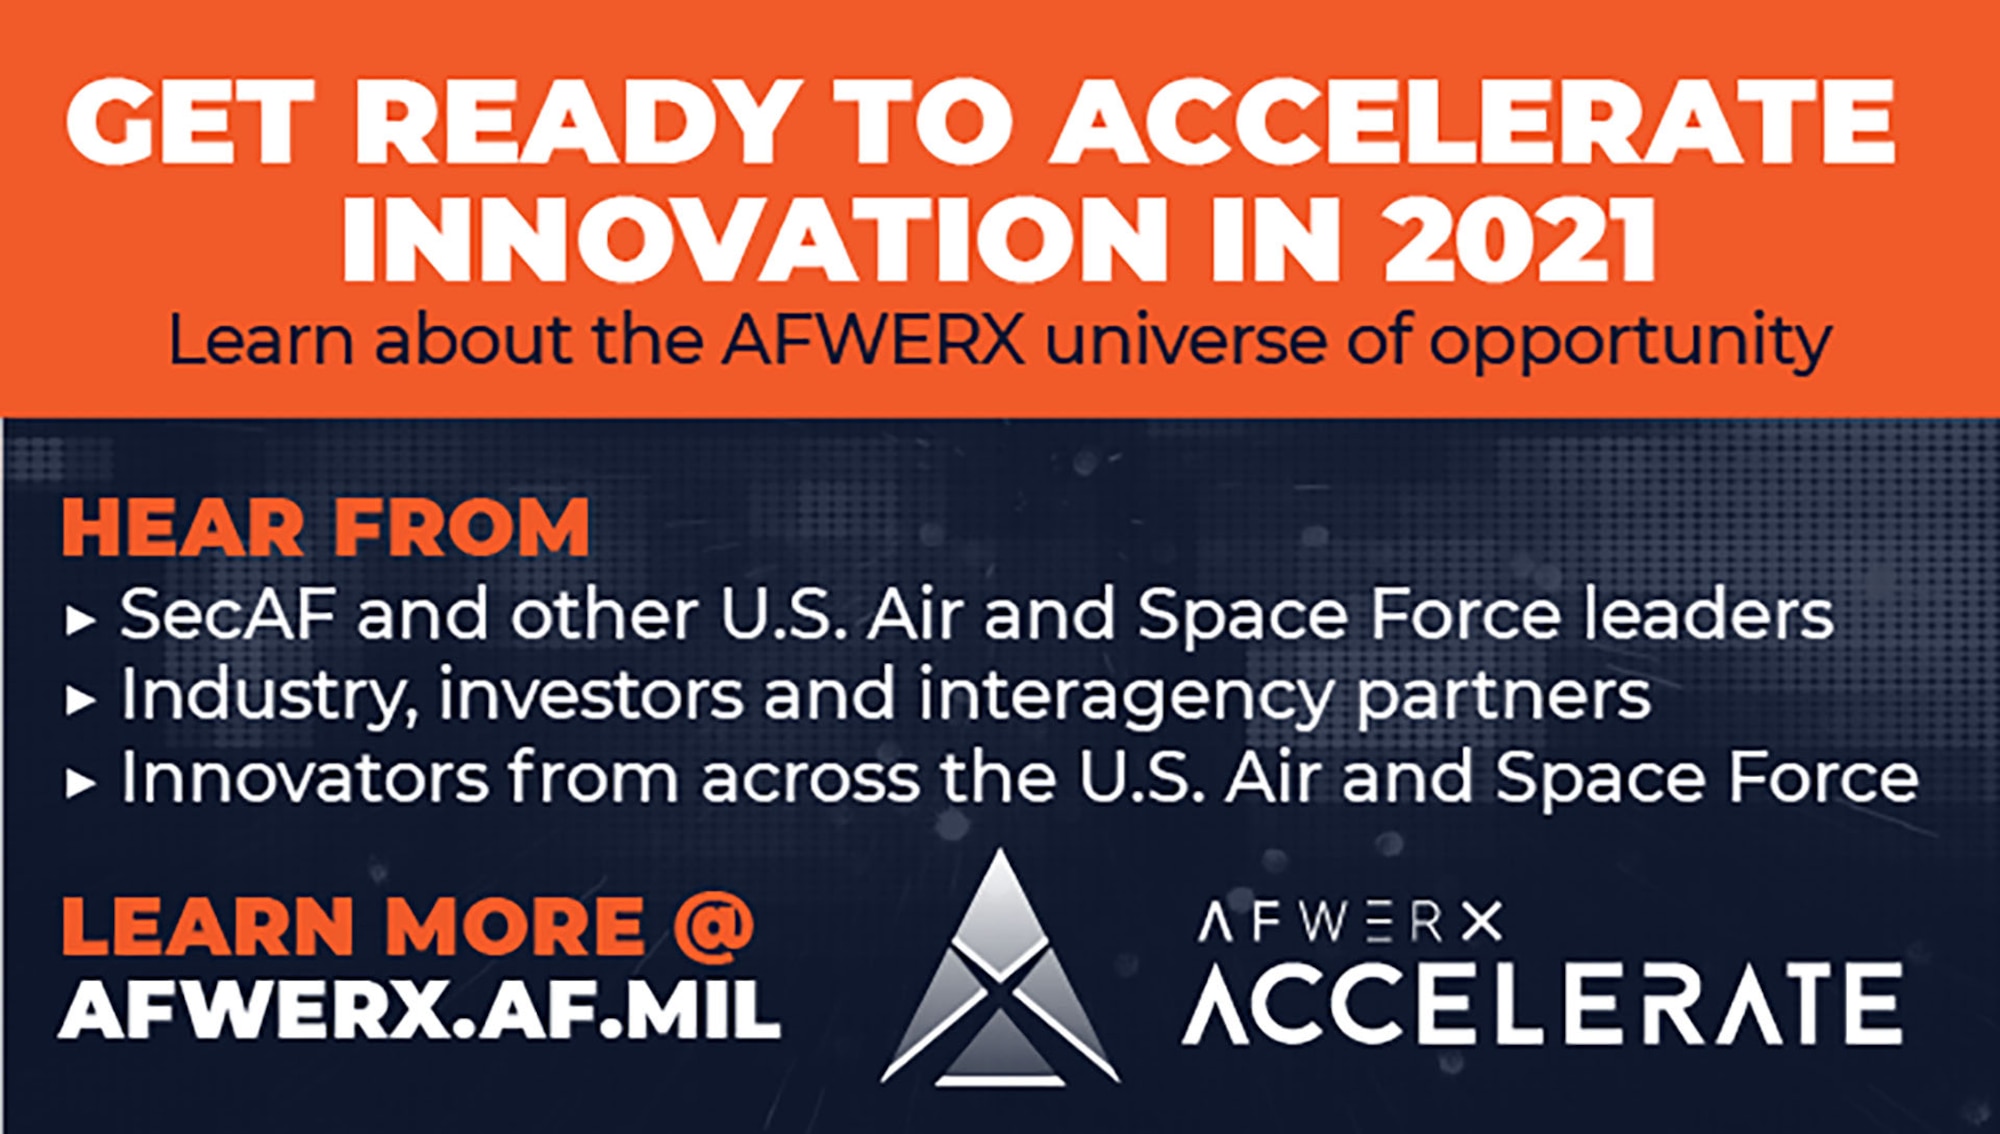 AFWERX’s inaugural Accelerate event will be held virtually Dec. 7-11, 2020. The event will highlight how AFWERX is institutionalizing air and space innovation across the Department of the Air Force. (U.S. Air Force courtesy graphic)